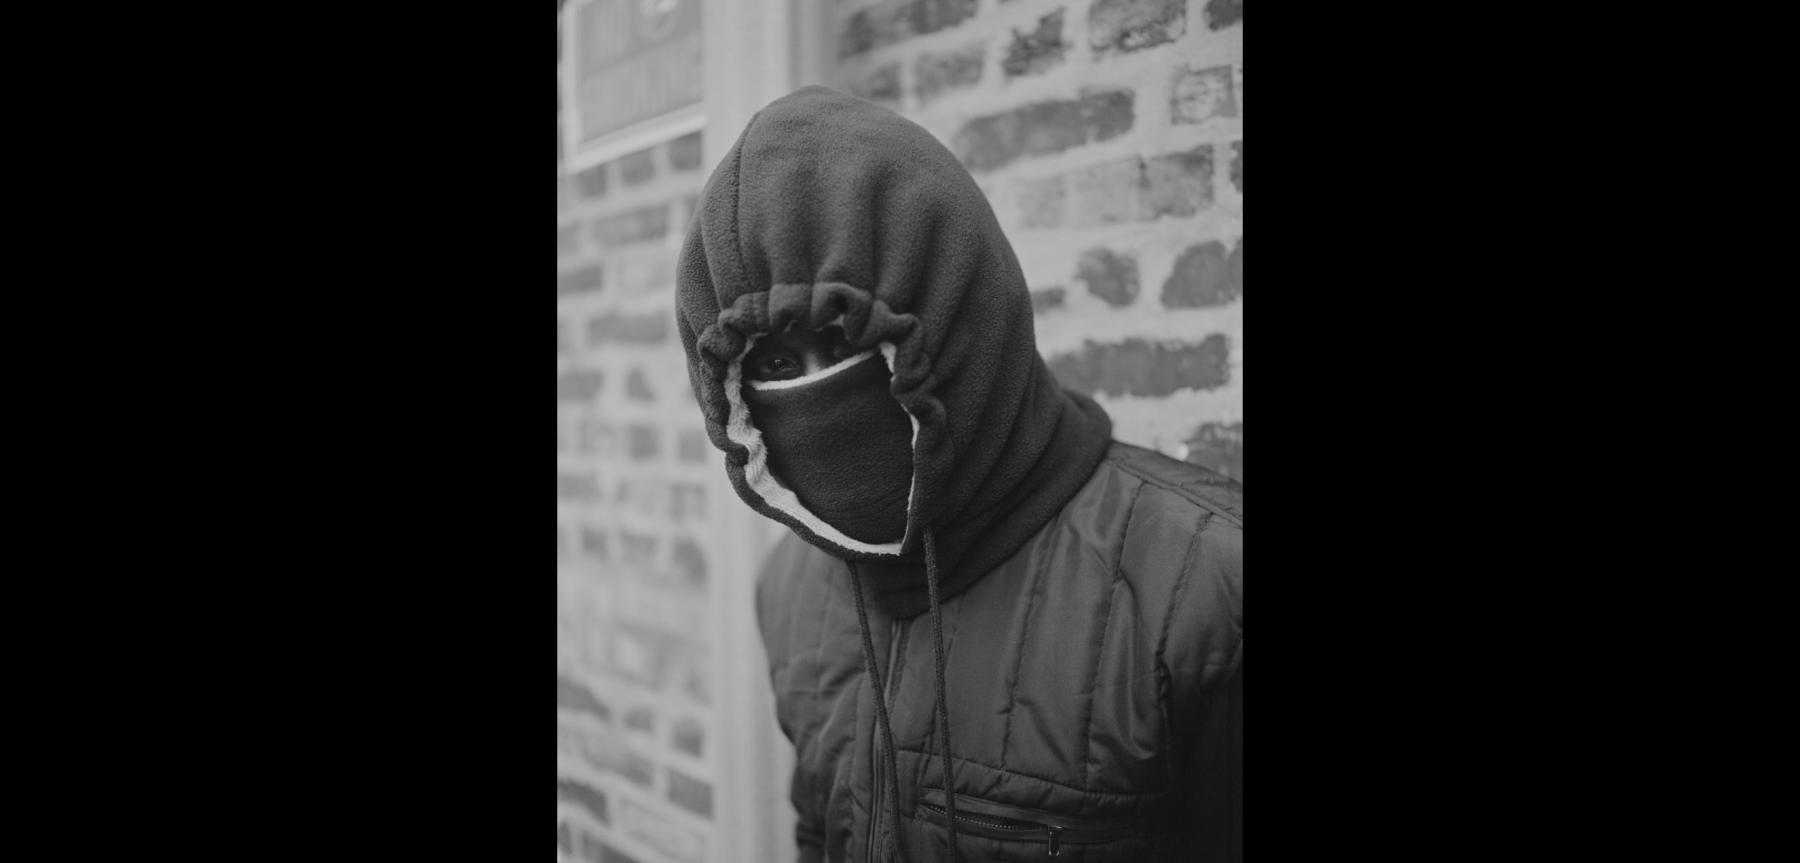 Black and white photo of a person wearing a dark colored hood and jacket with a thick mask covering face, leaning against brick wall.